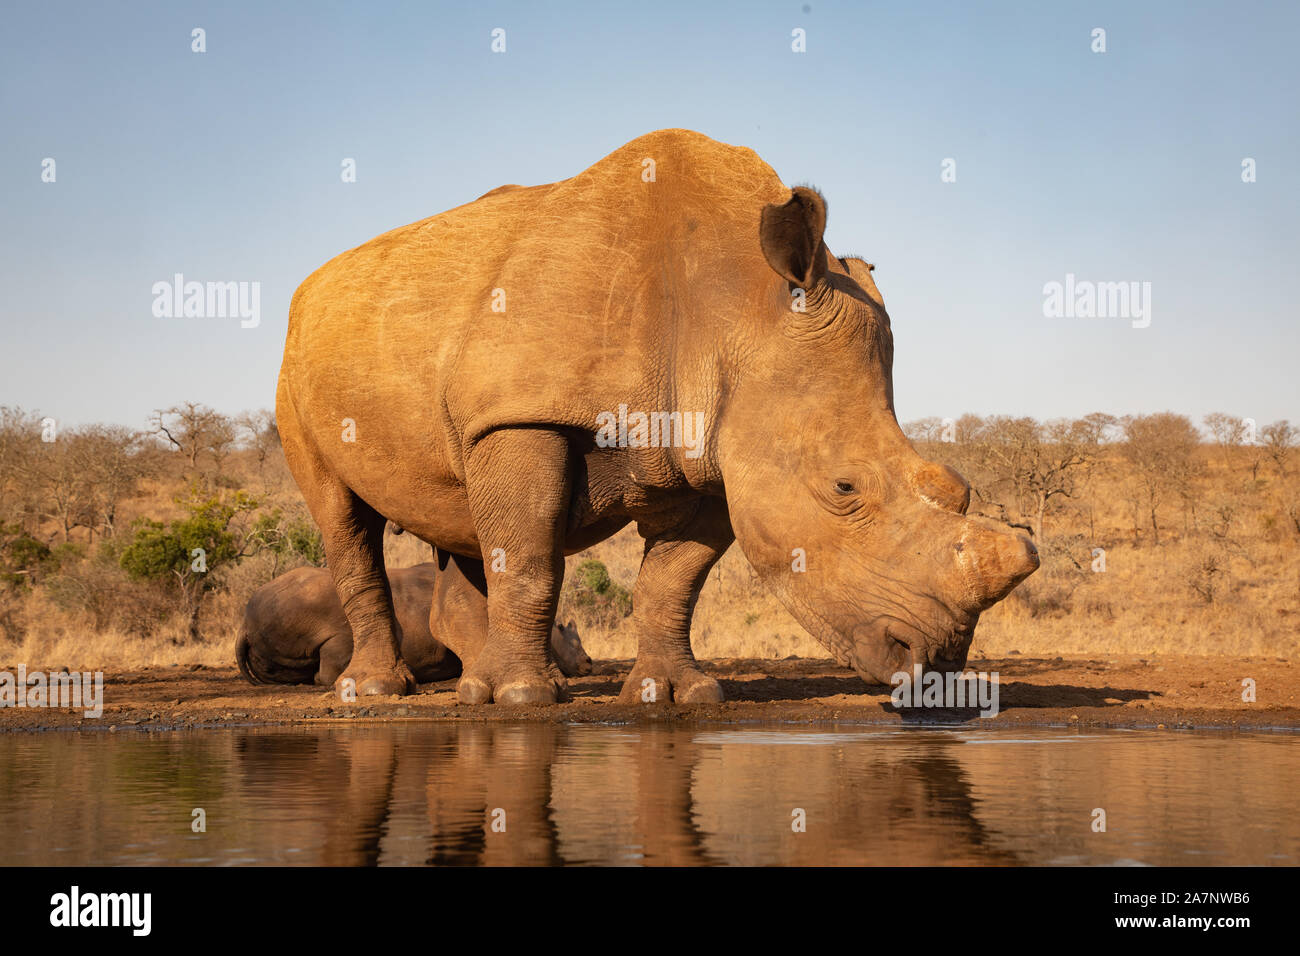 An adult rhinoceros drinking from a pool in Zimanga private game reserver Stock Photo